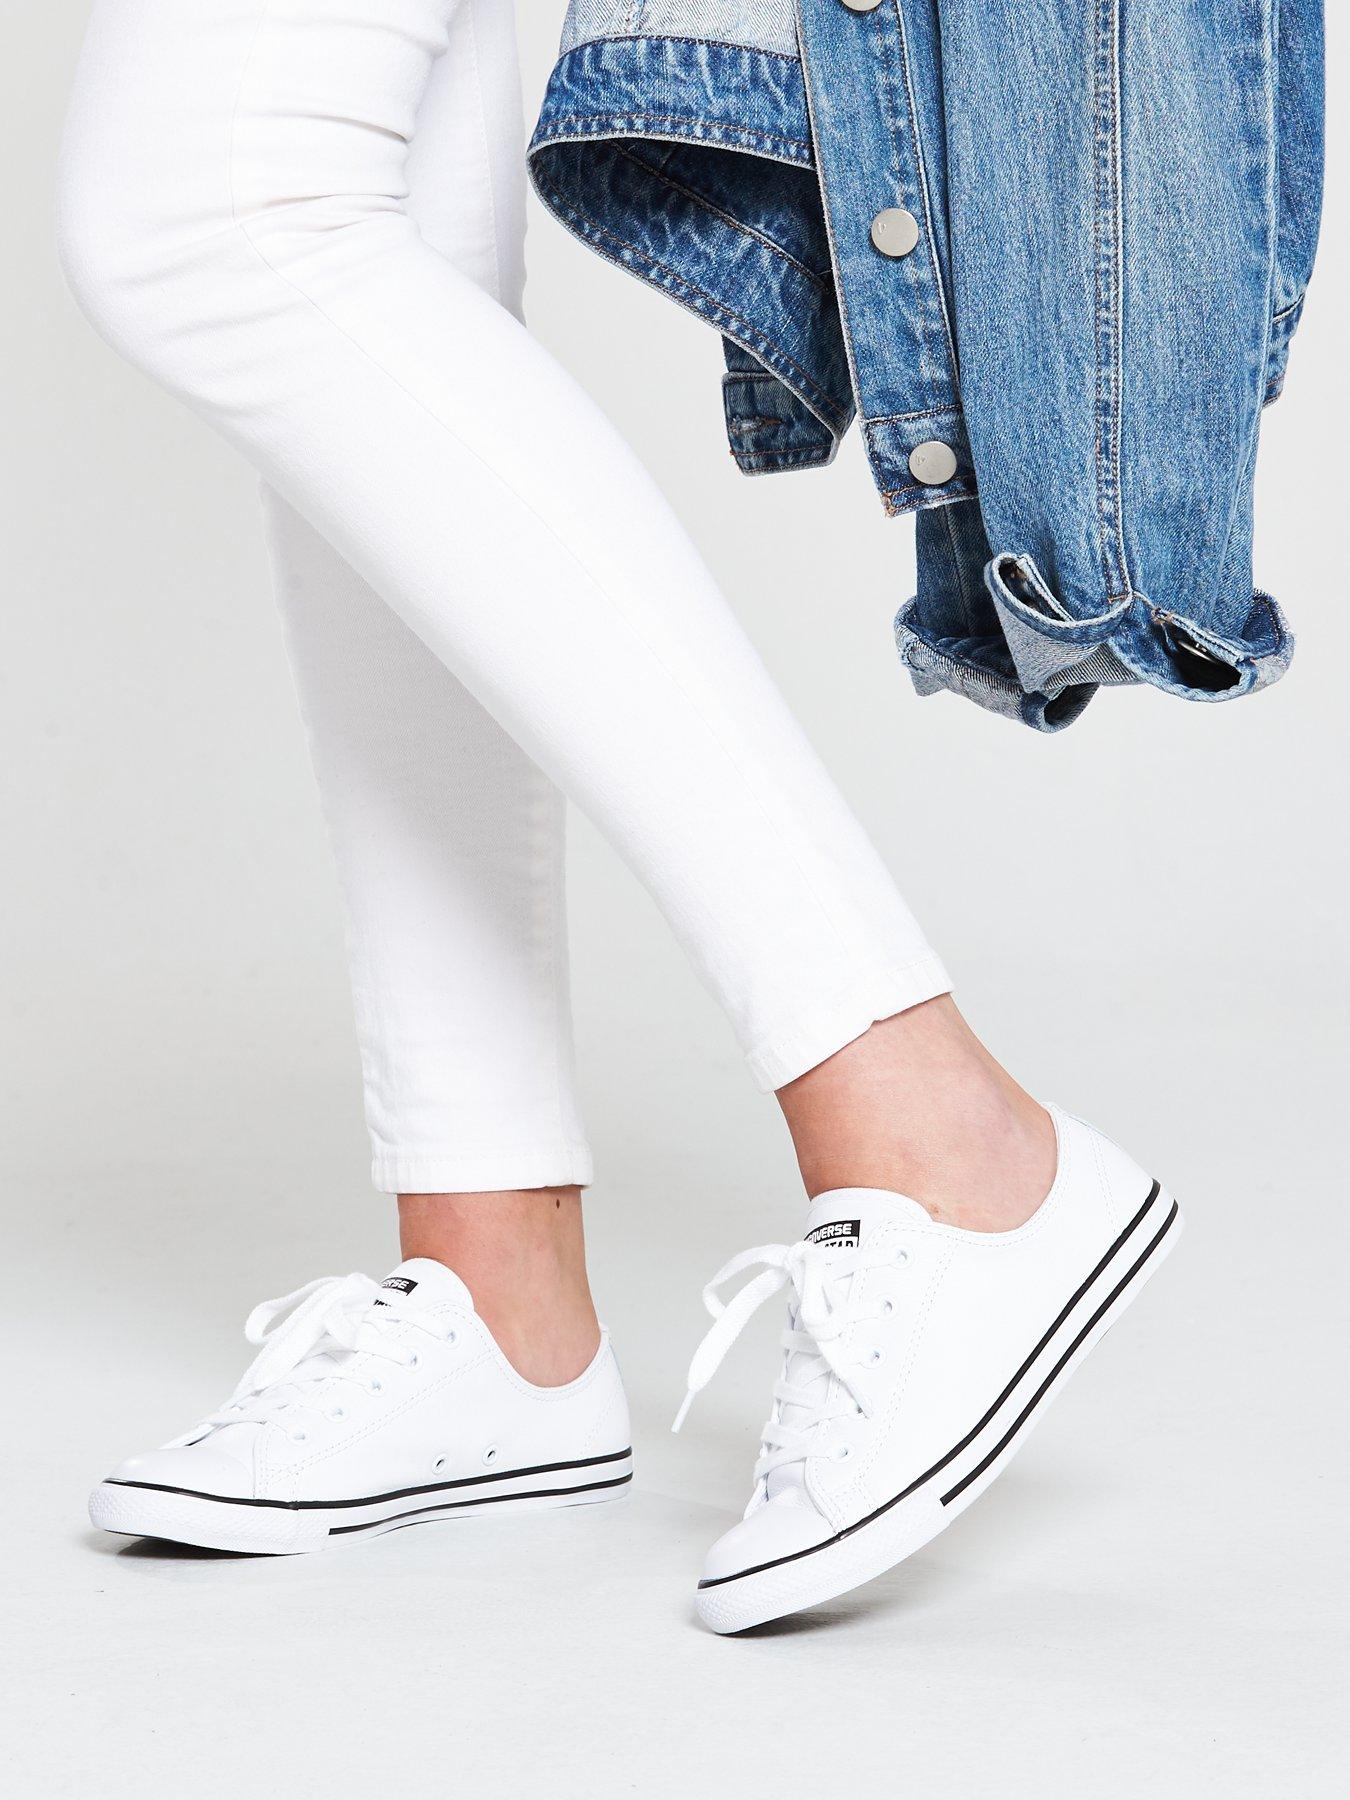 converse dainty ox leather